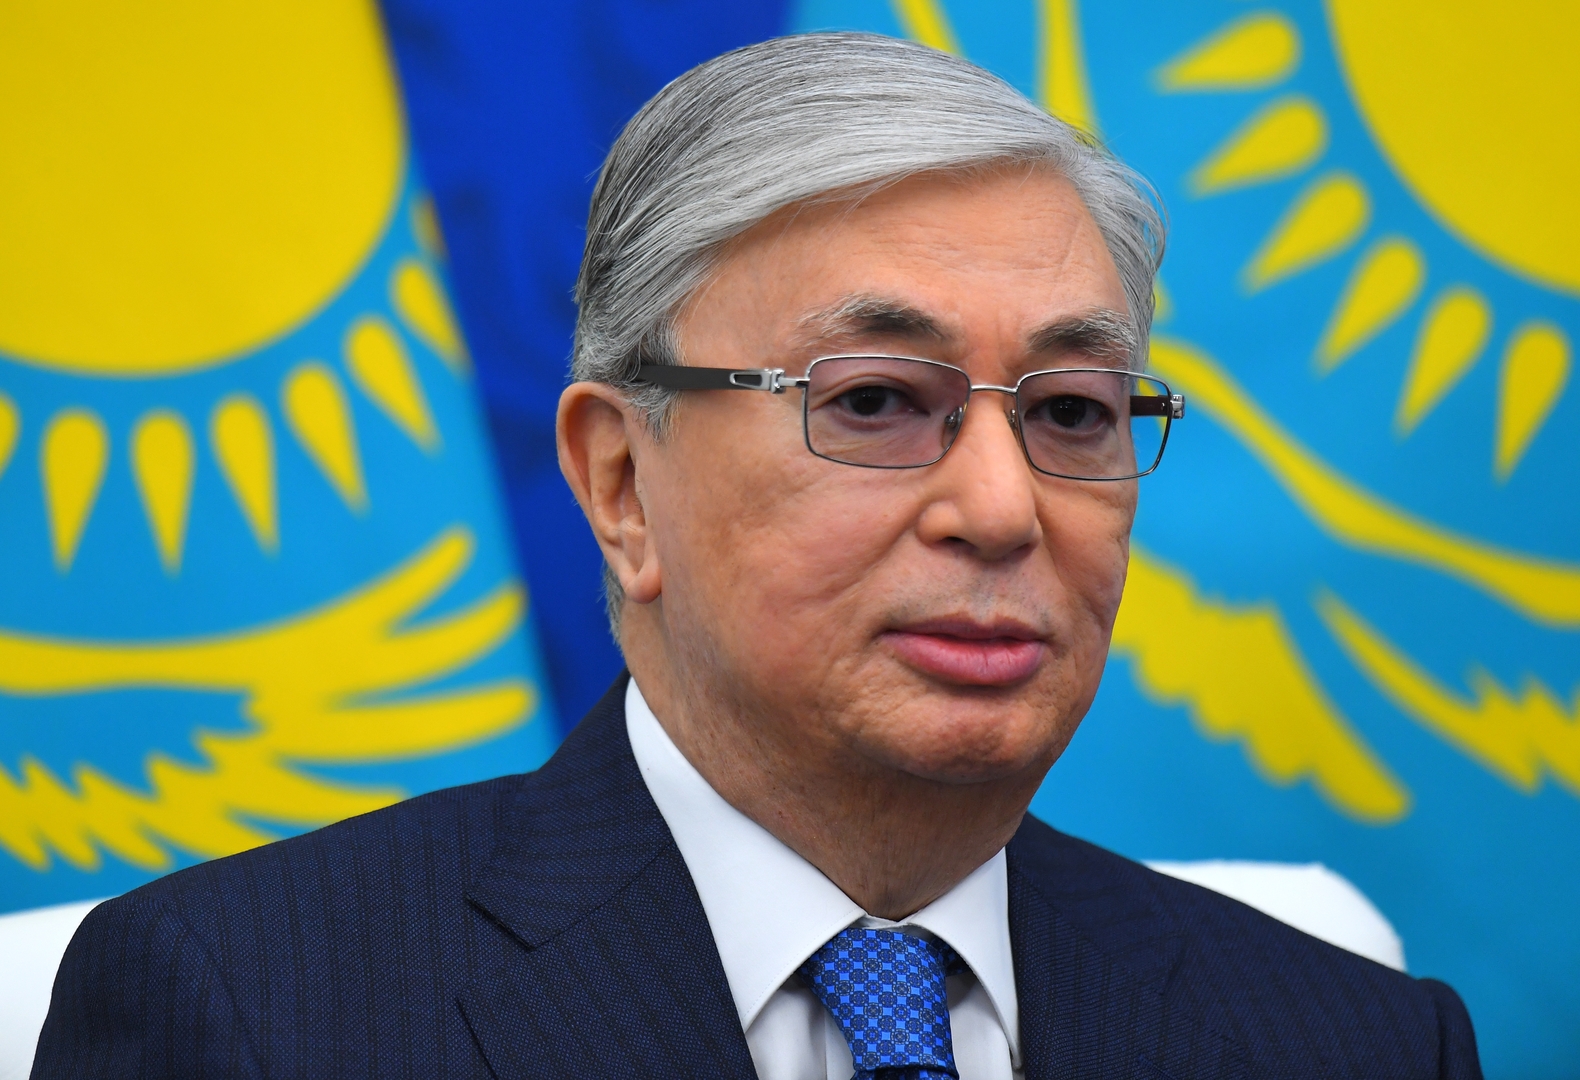 Kazakhstan announces the successful completion of the peacekeeping missions and the start of their withdrawal after two days